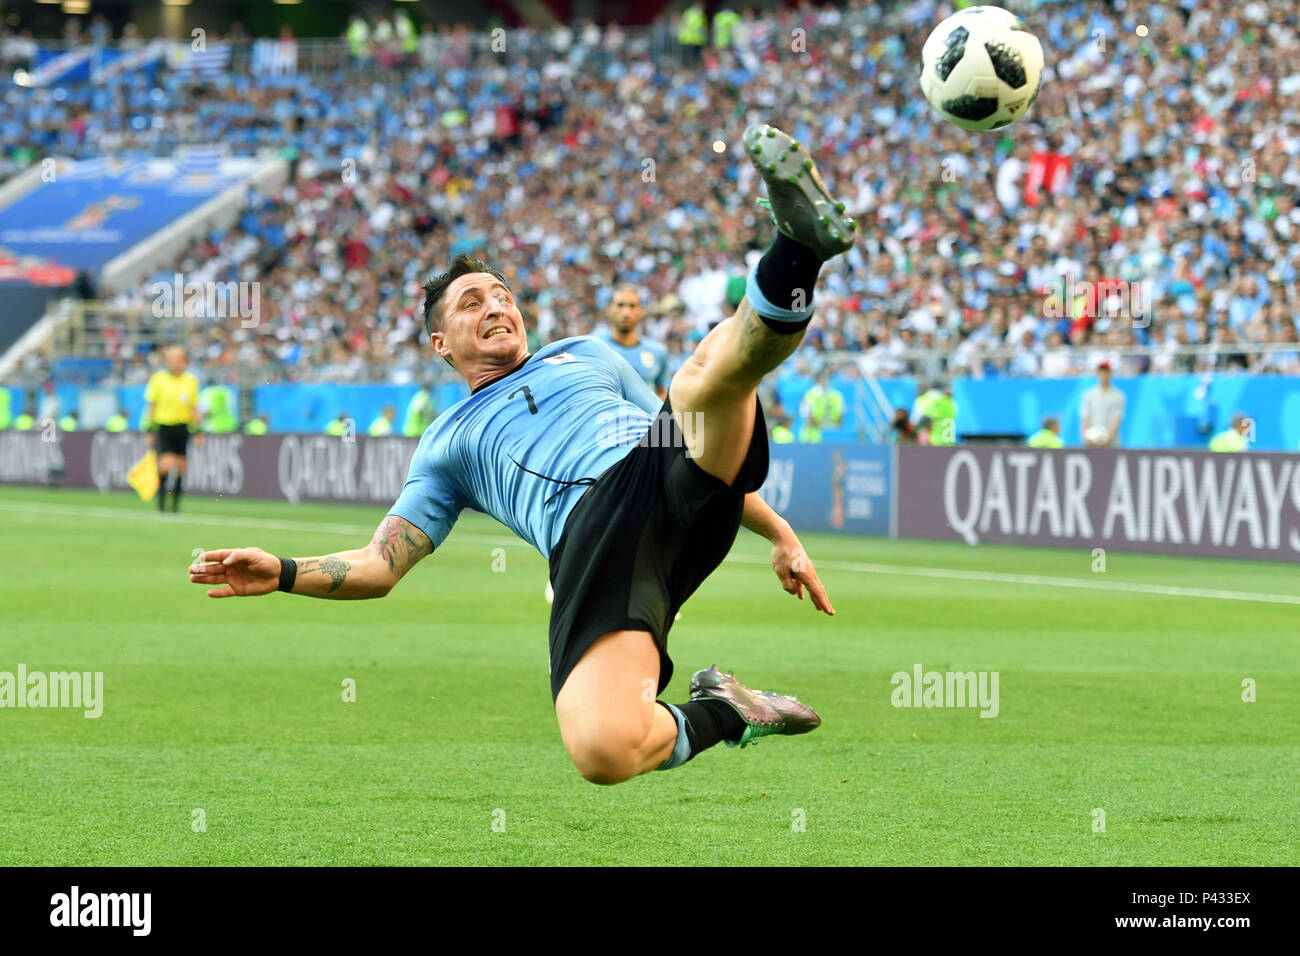 Rostov On Don, Russland. 20th June, 2018. Cristian RODRIGUEZ (URU), artistic, action, individual action, frame, cut out, full body, whole figure. Uruguay (Saudi Arabia (KSA) 1-0, preliminary round, group A, match 18, on 20/06/2018 in Rostov-on-Don, Rostov Arena Football World Cup 2018 in Russia from 14.06 - 15.07.2018. | Usage worldwide Credit: dpa/Alamy Live News Stock Photo